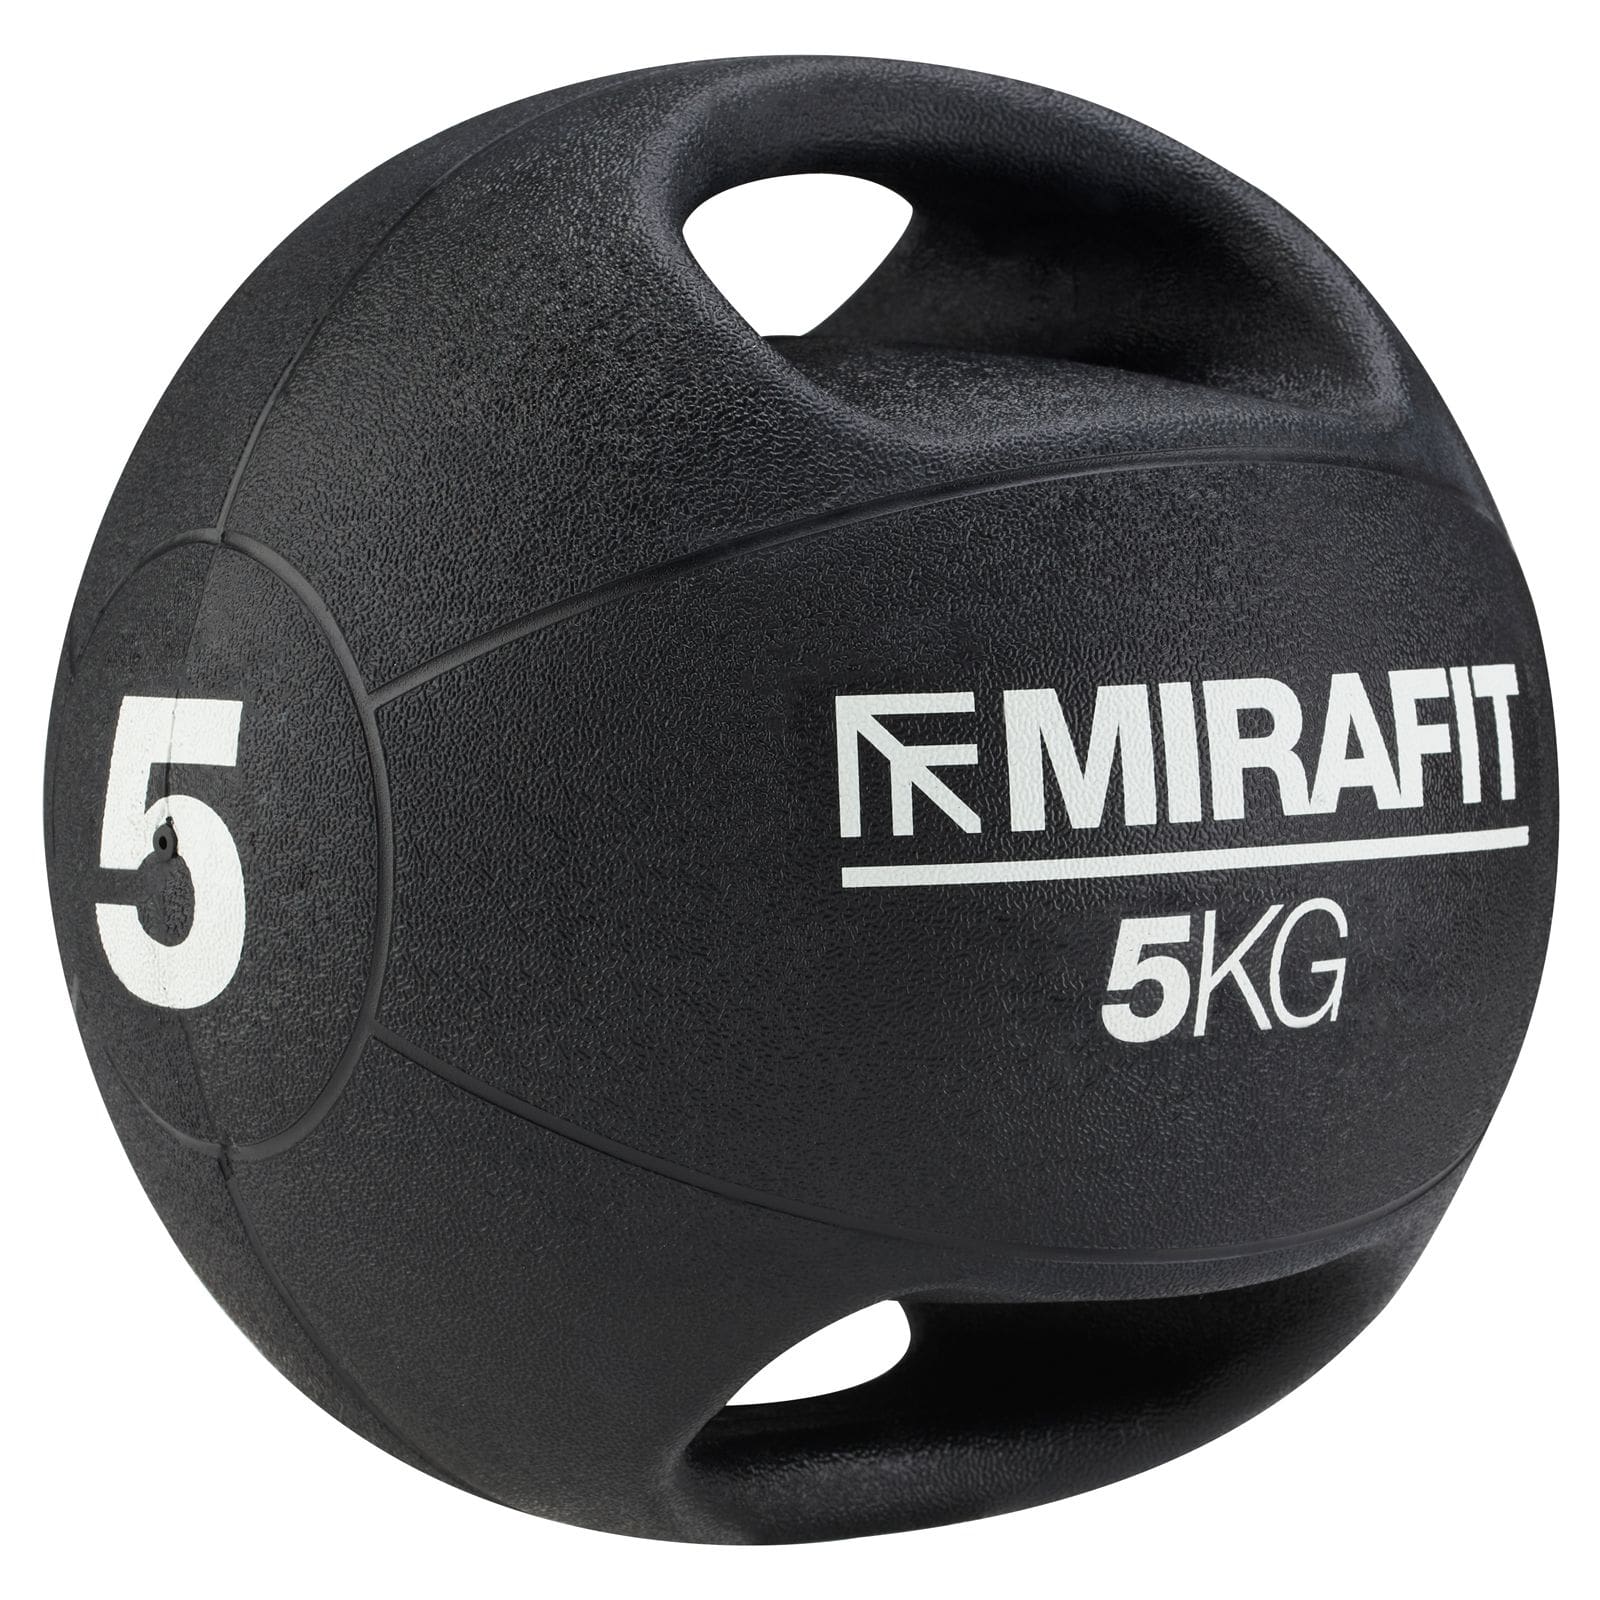 Weights of the Mirafit medicine ball with handles 5kg UK Review